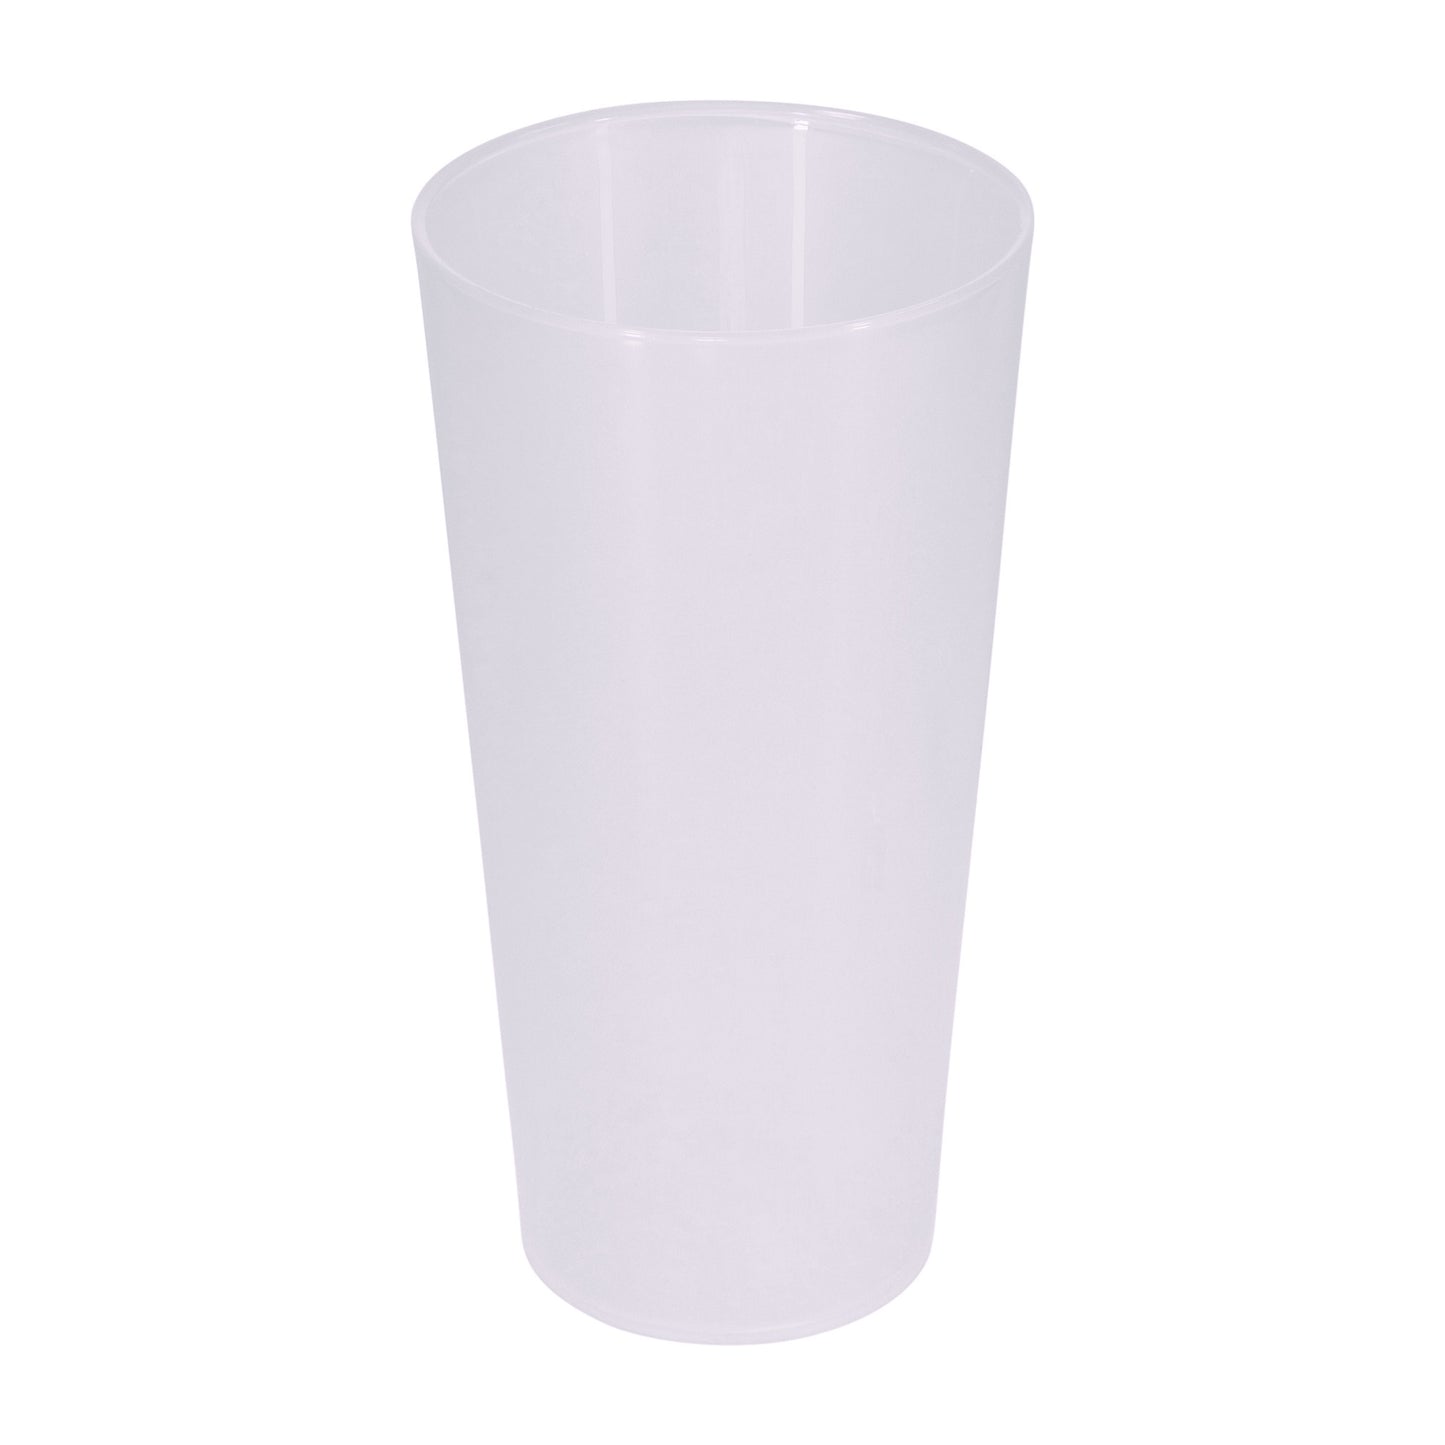 Pack of 10 Pint Cups Reusable Plastic - 1 Pint 568ml 20oz - Dishwasher safe Strong Straight edge Glasses for Beer, Soft Drinks, Water